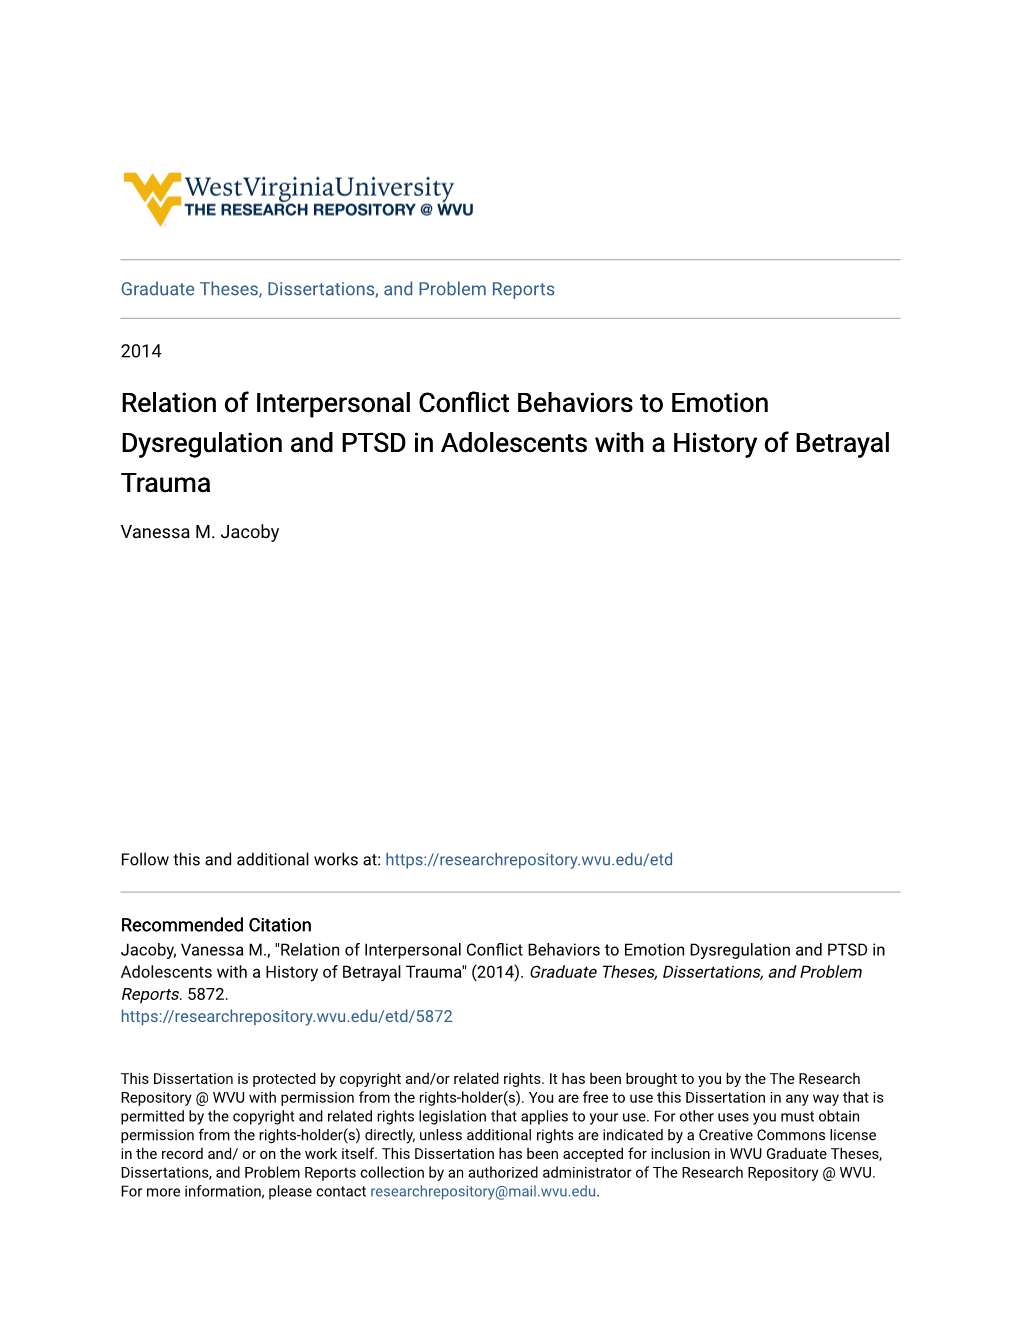 Relation of Interpersonal Conflict Behaviors to Emotion Dysregulation and PTSD in Adolescents with a History of Betrayal Trauma